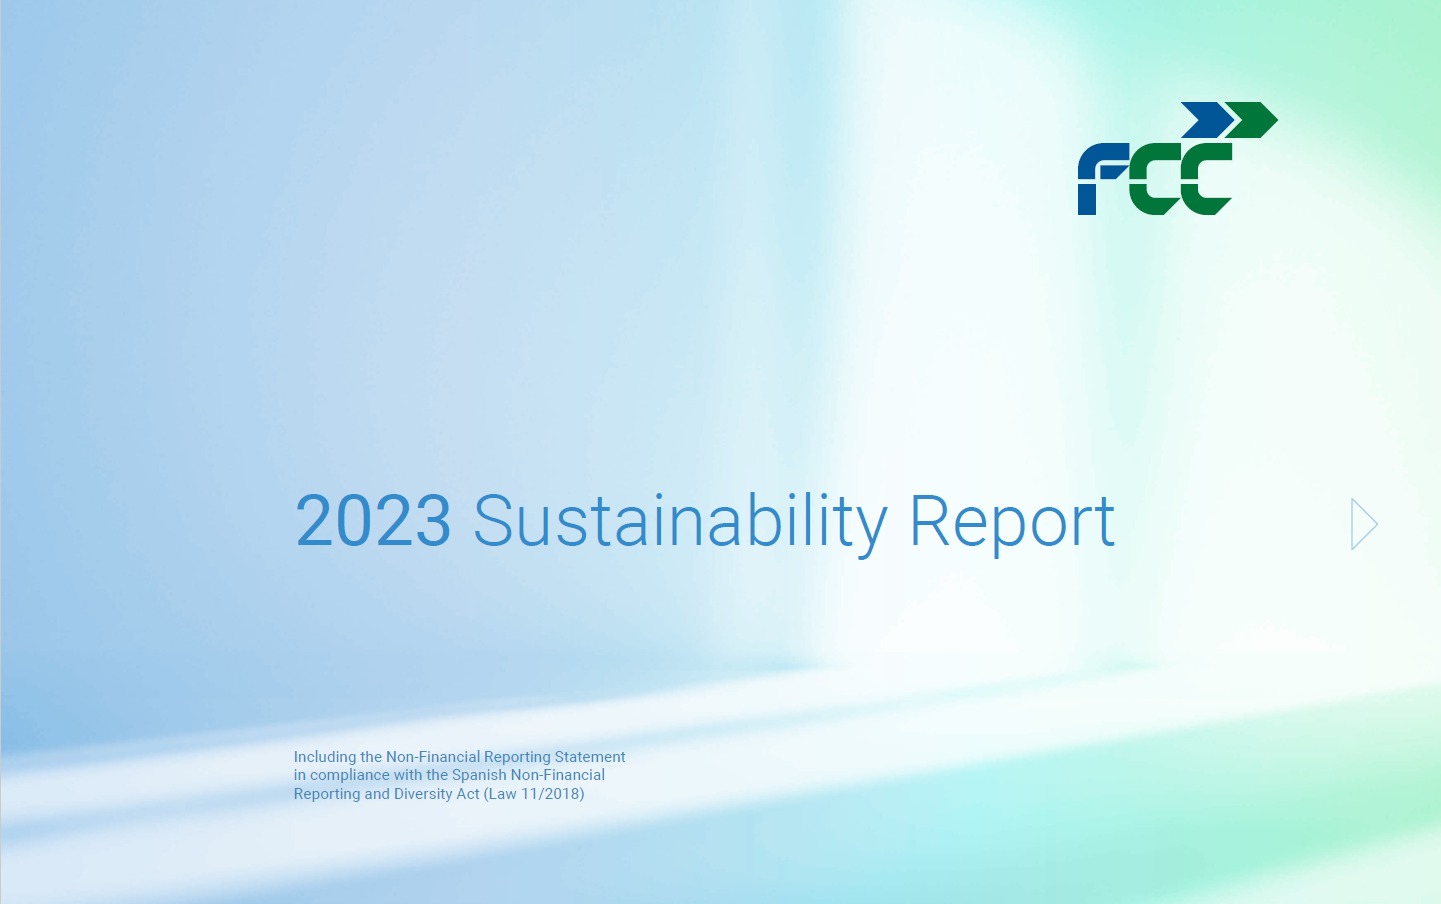 FCC Group 2023 Sustainability Report